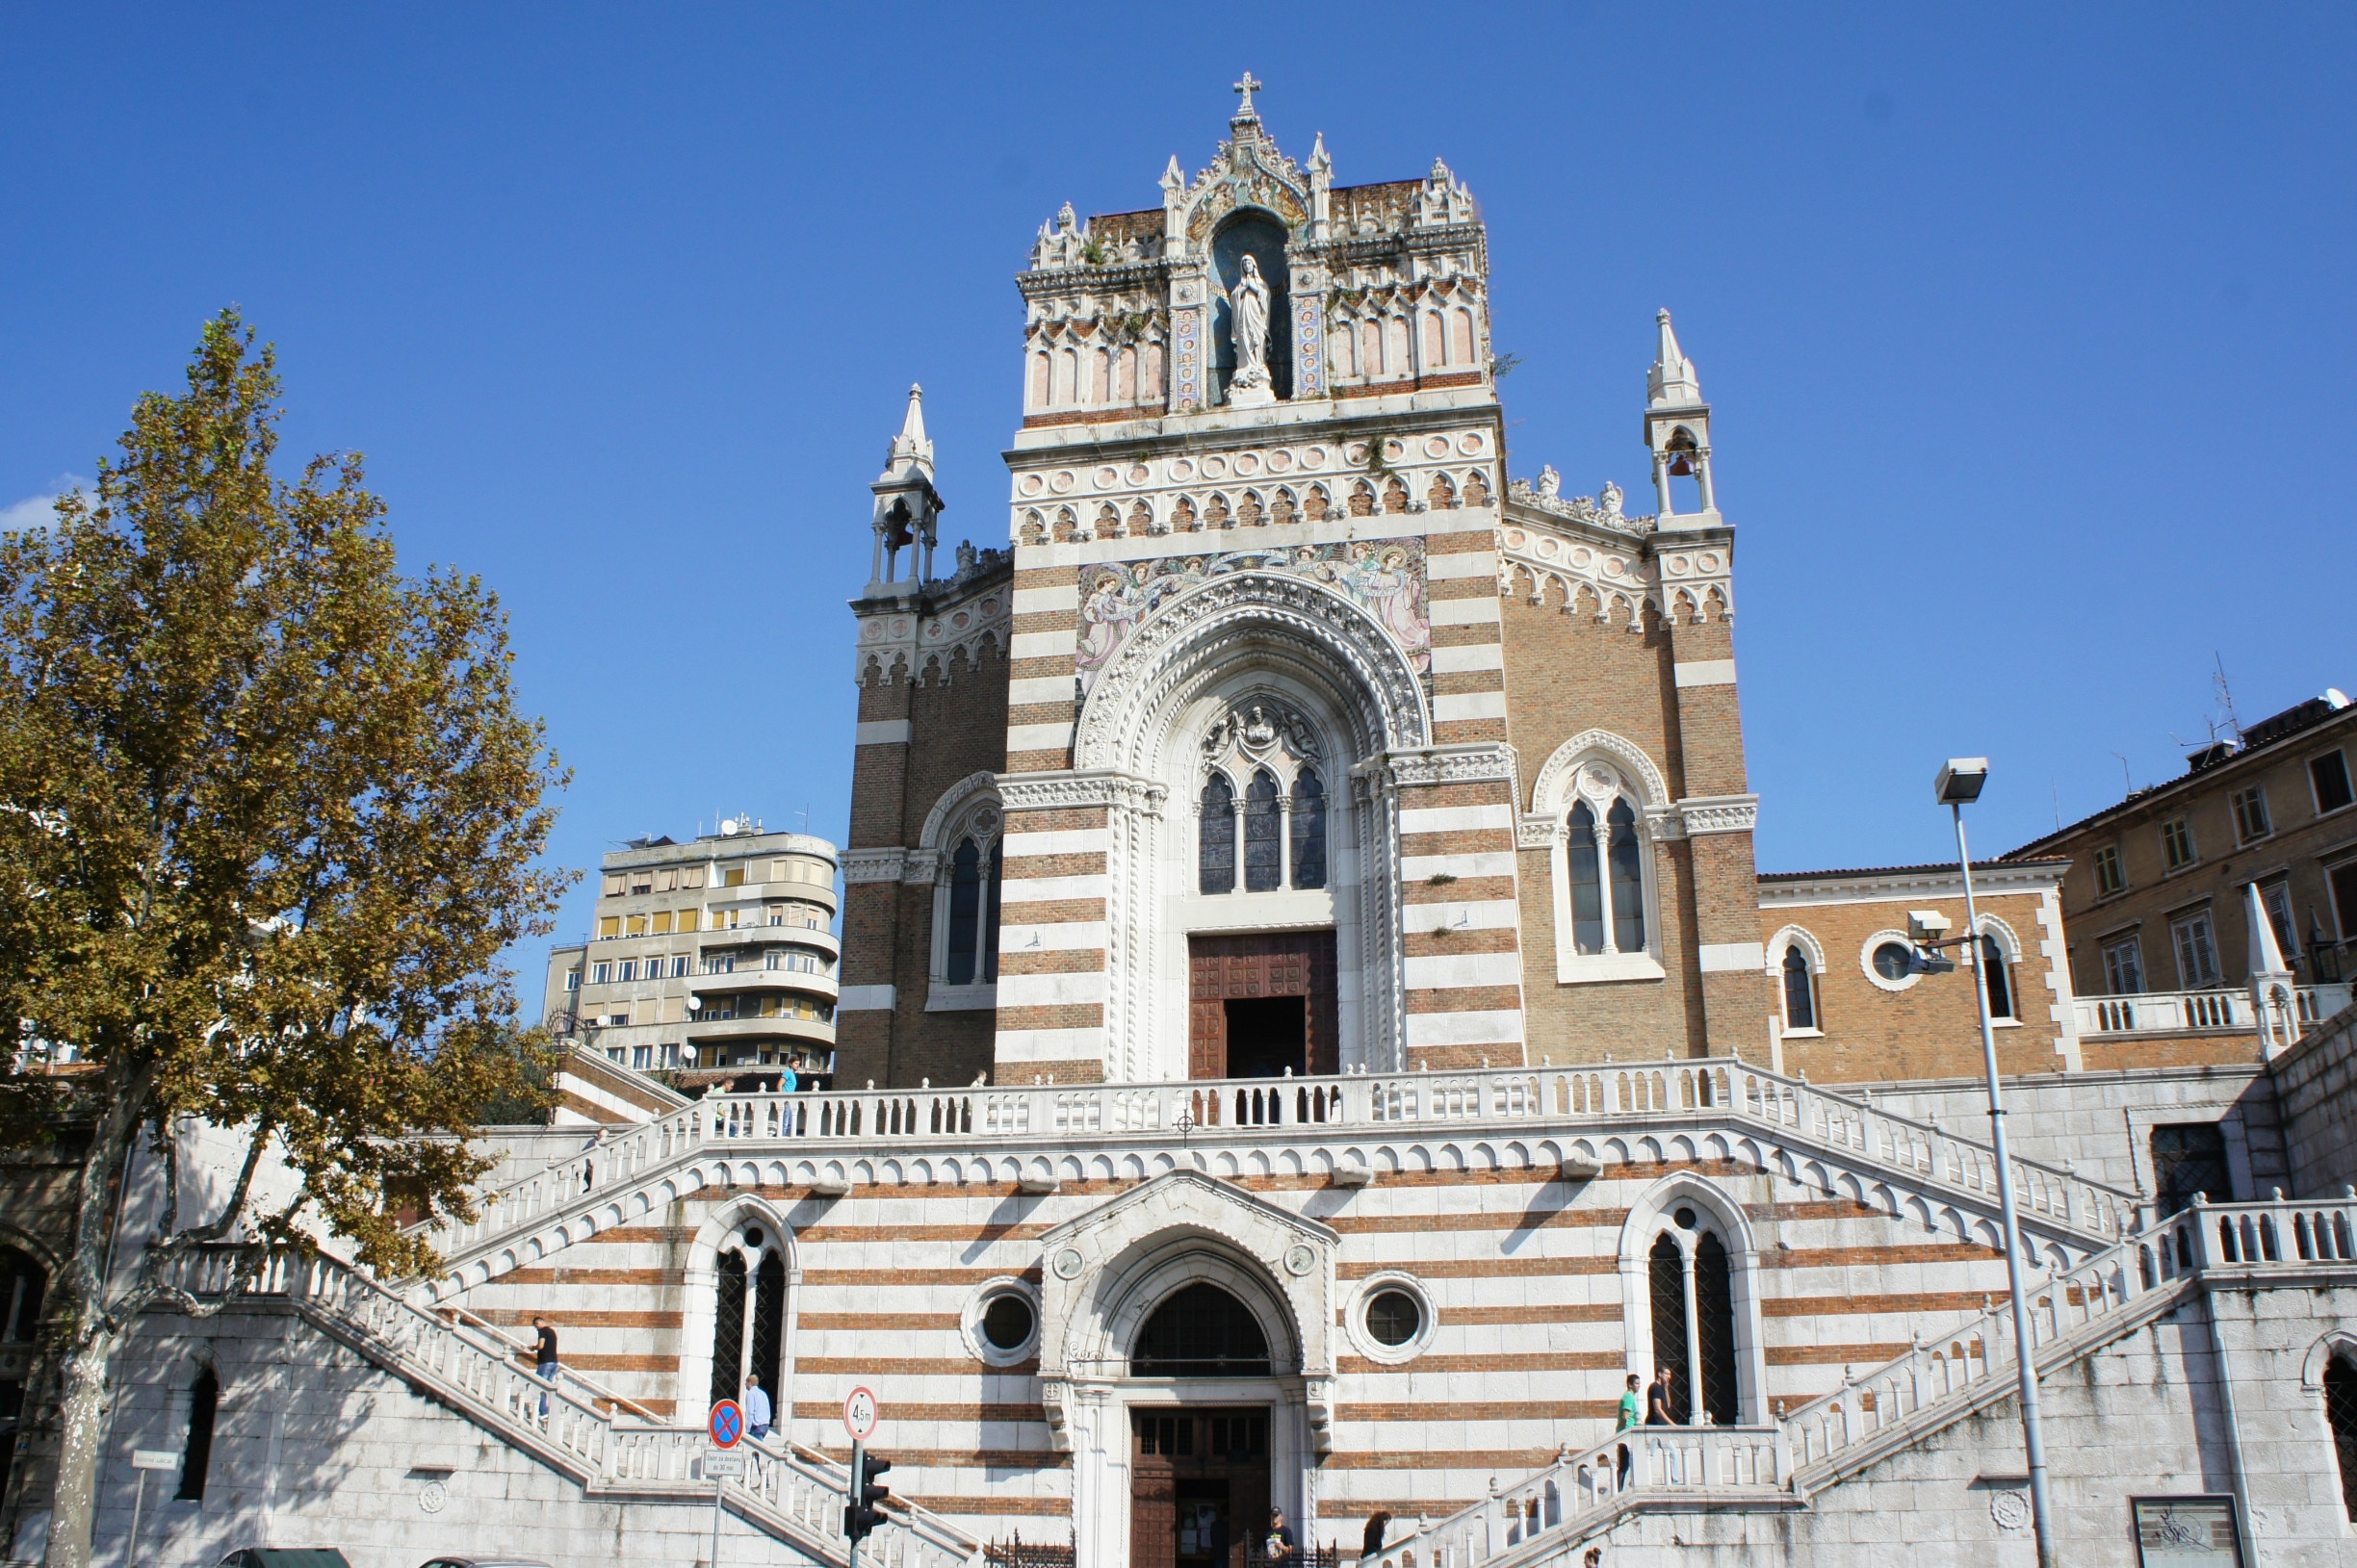 The Capuchin Church of Our Lady of Lourdes in Rijeka.